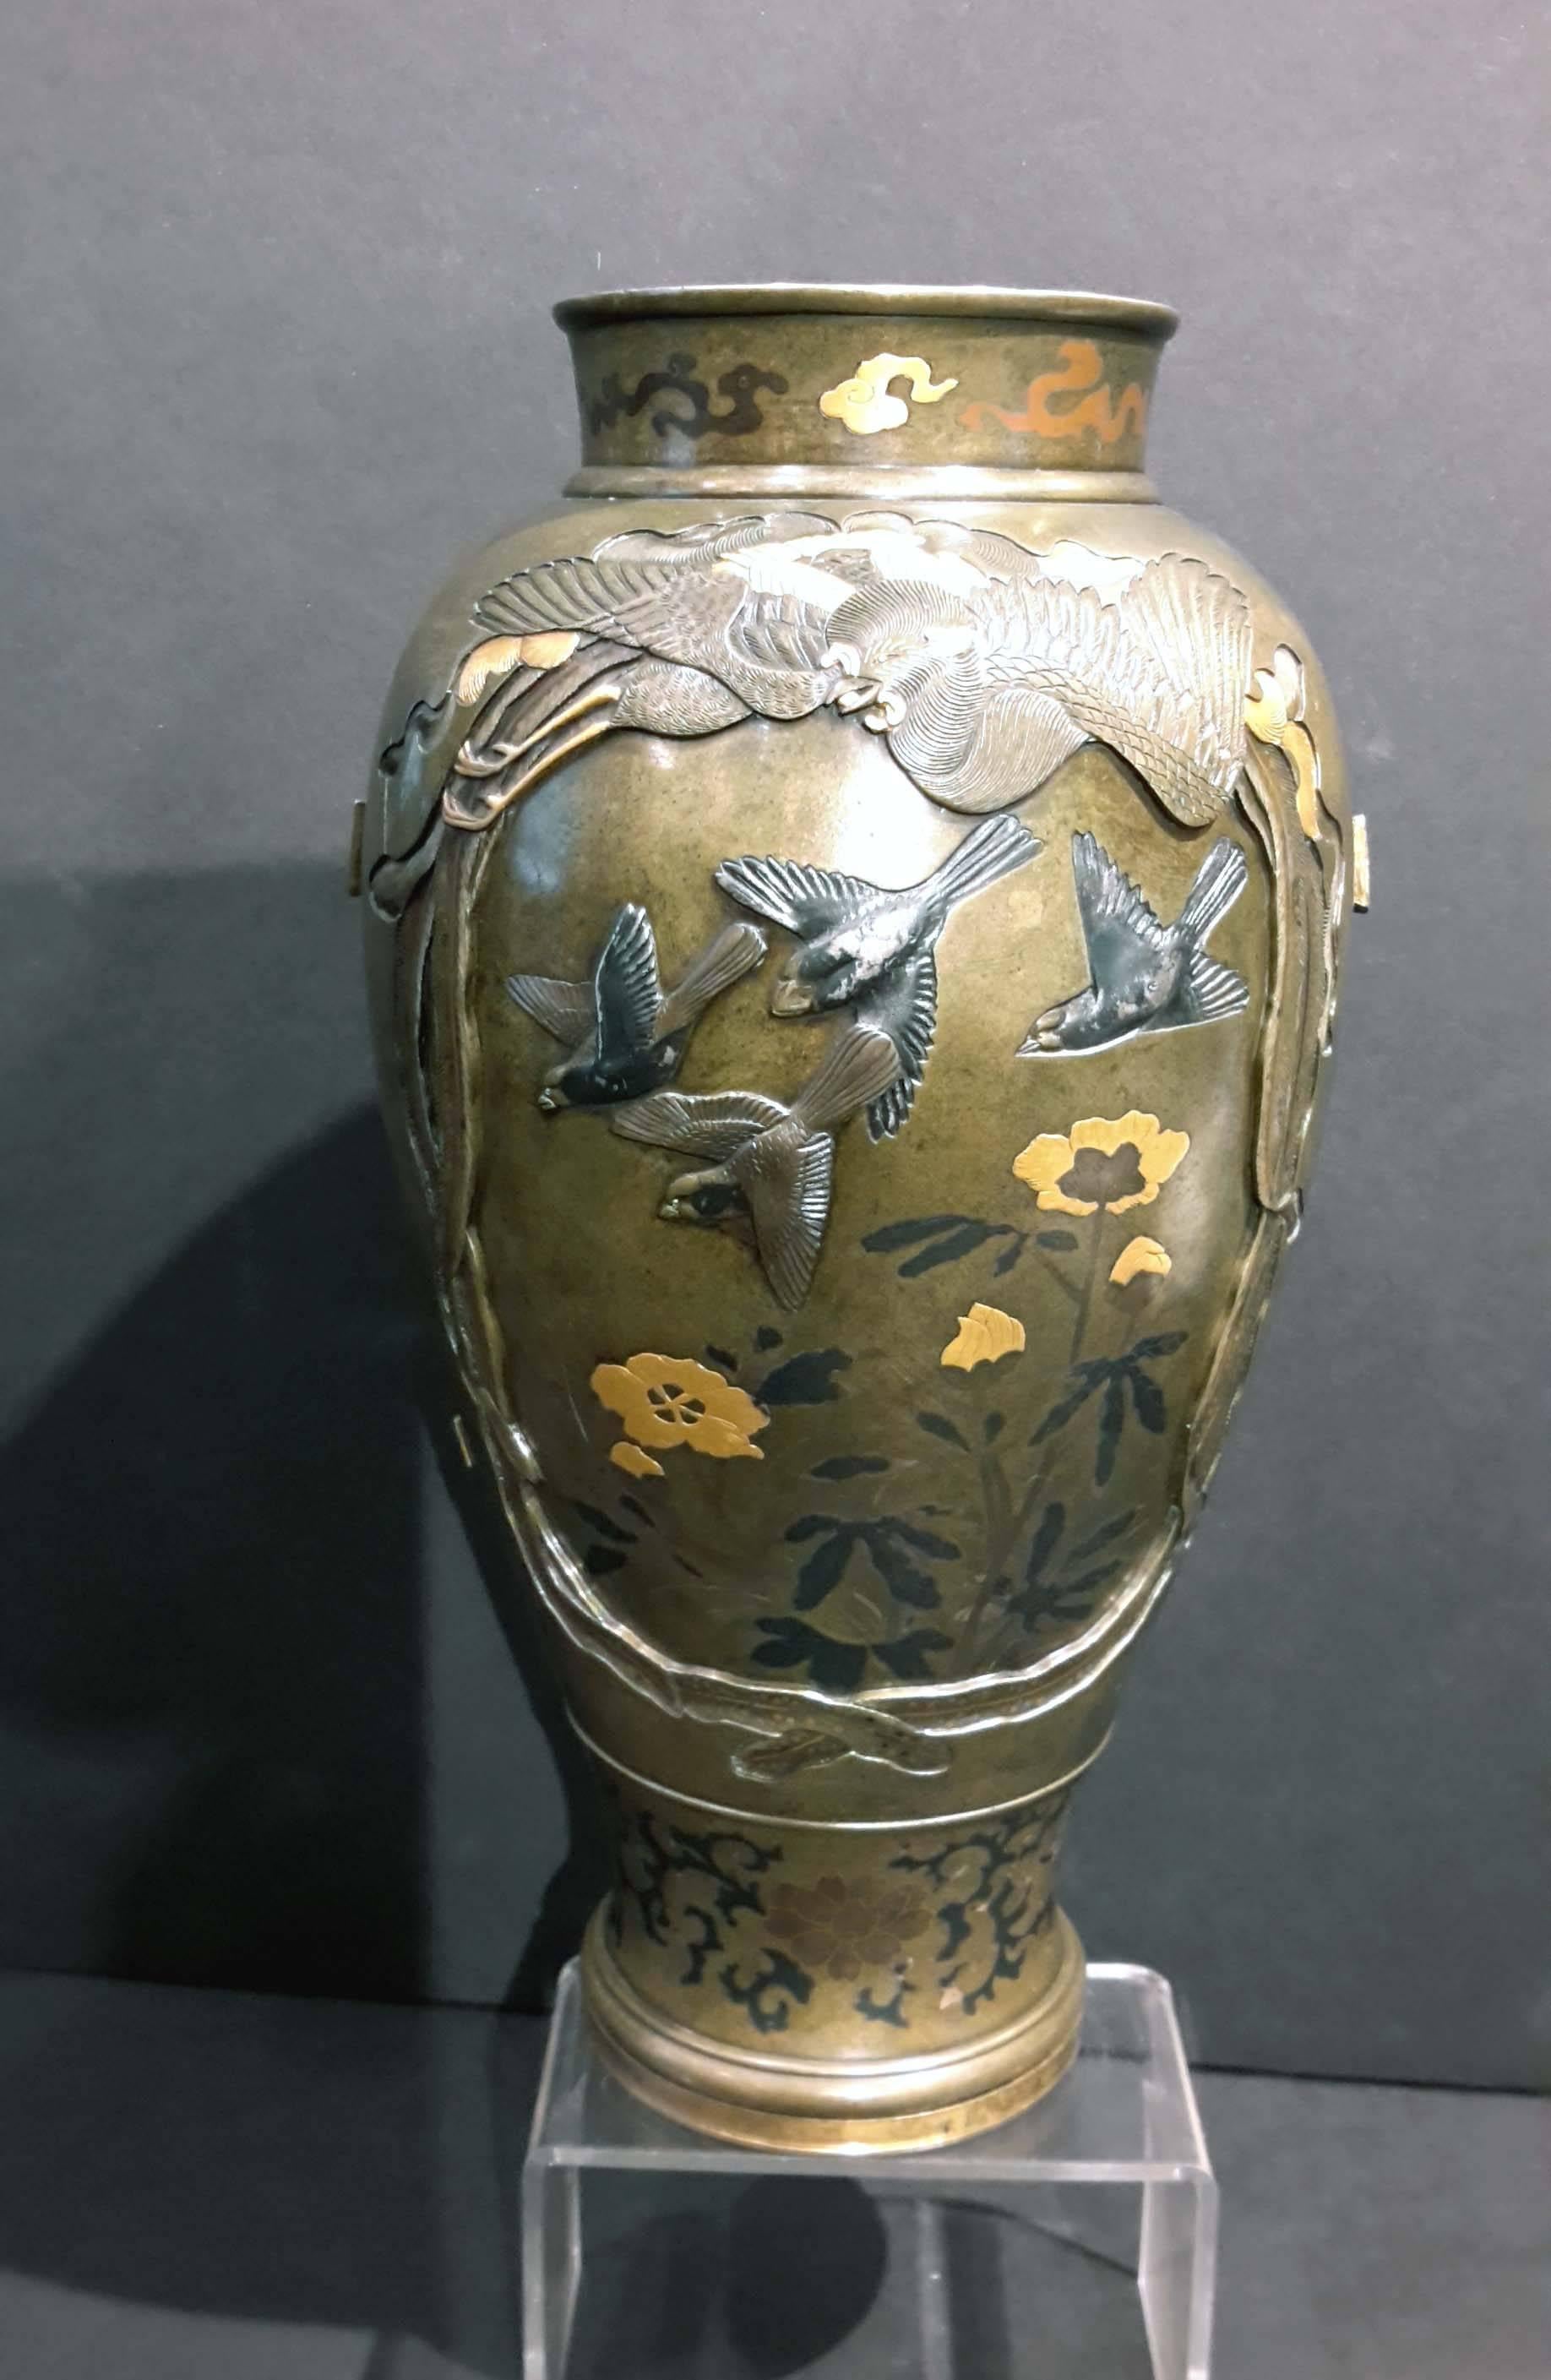 Great quality bronze vase inlaid with gold and silver. Depicting a falcon on one side and birds flying on the other, surrounded by a phoenix on each side.
Meiji period, late 19th century.
 